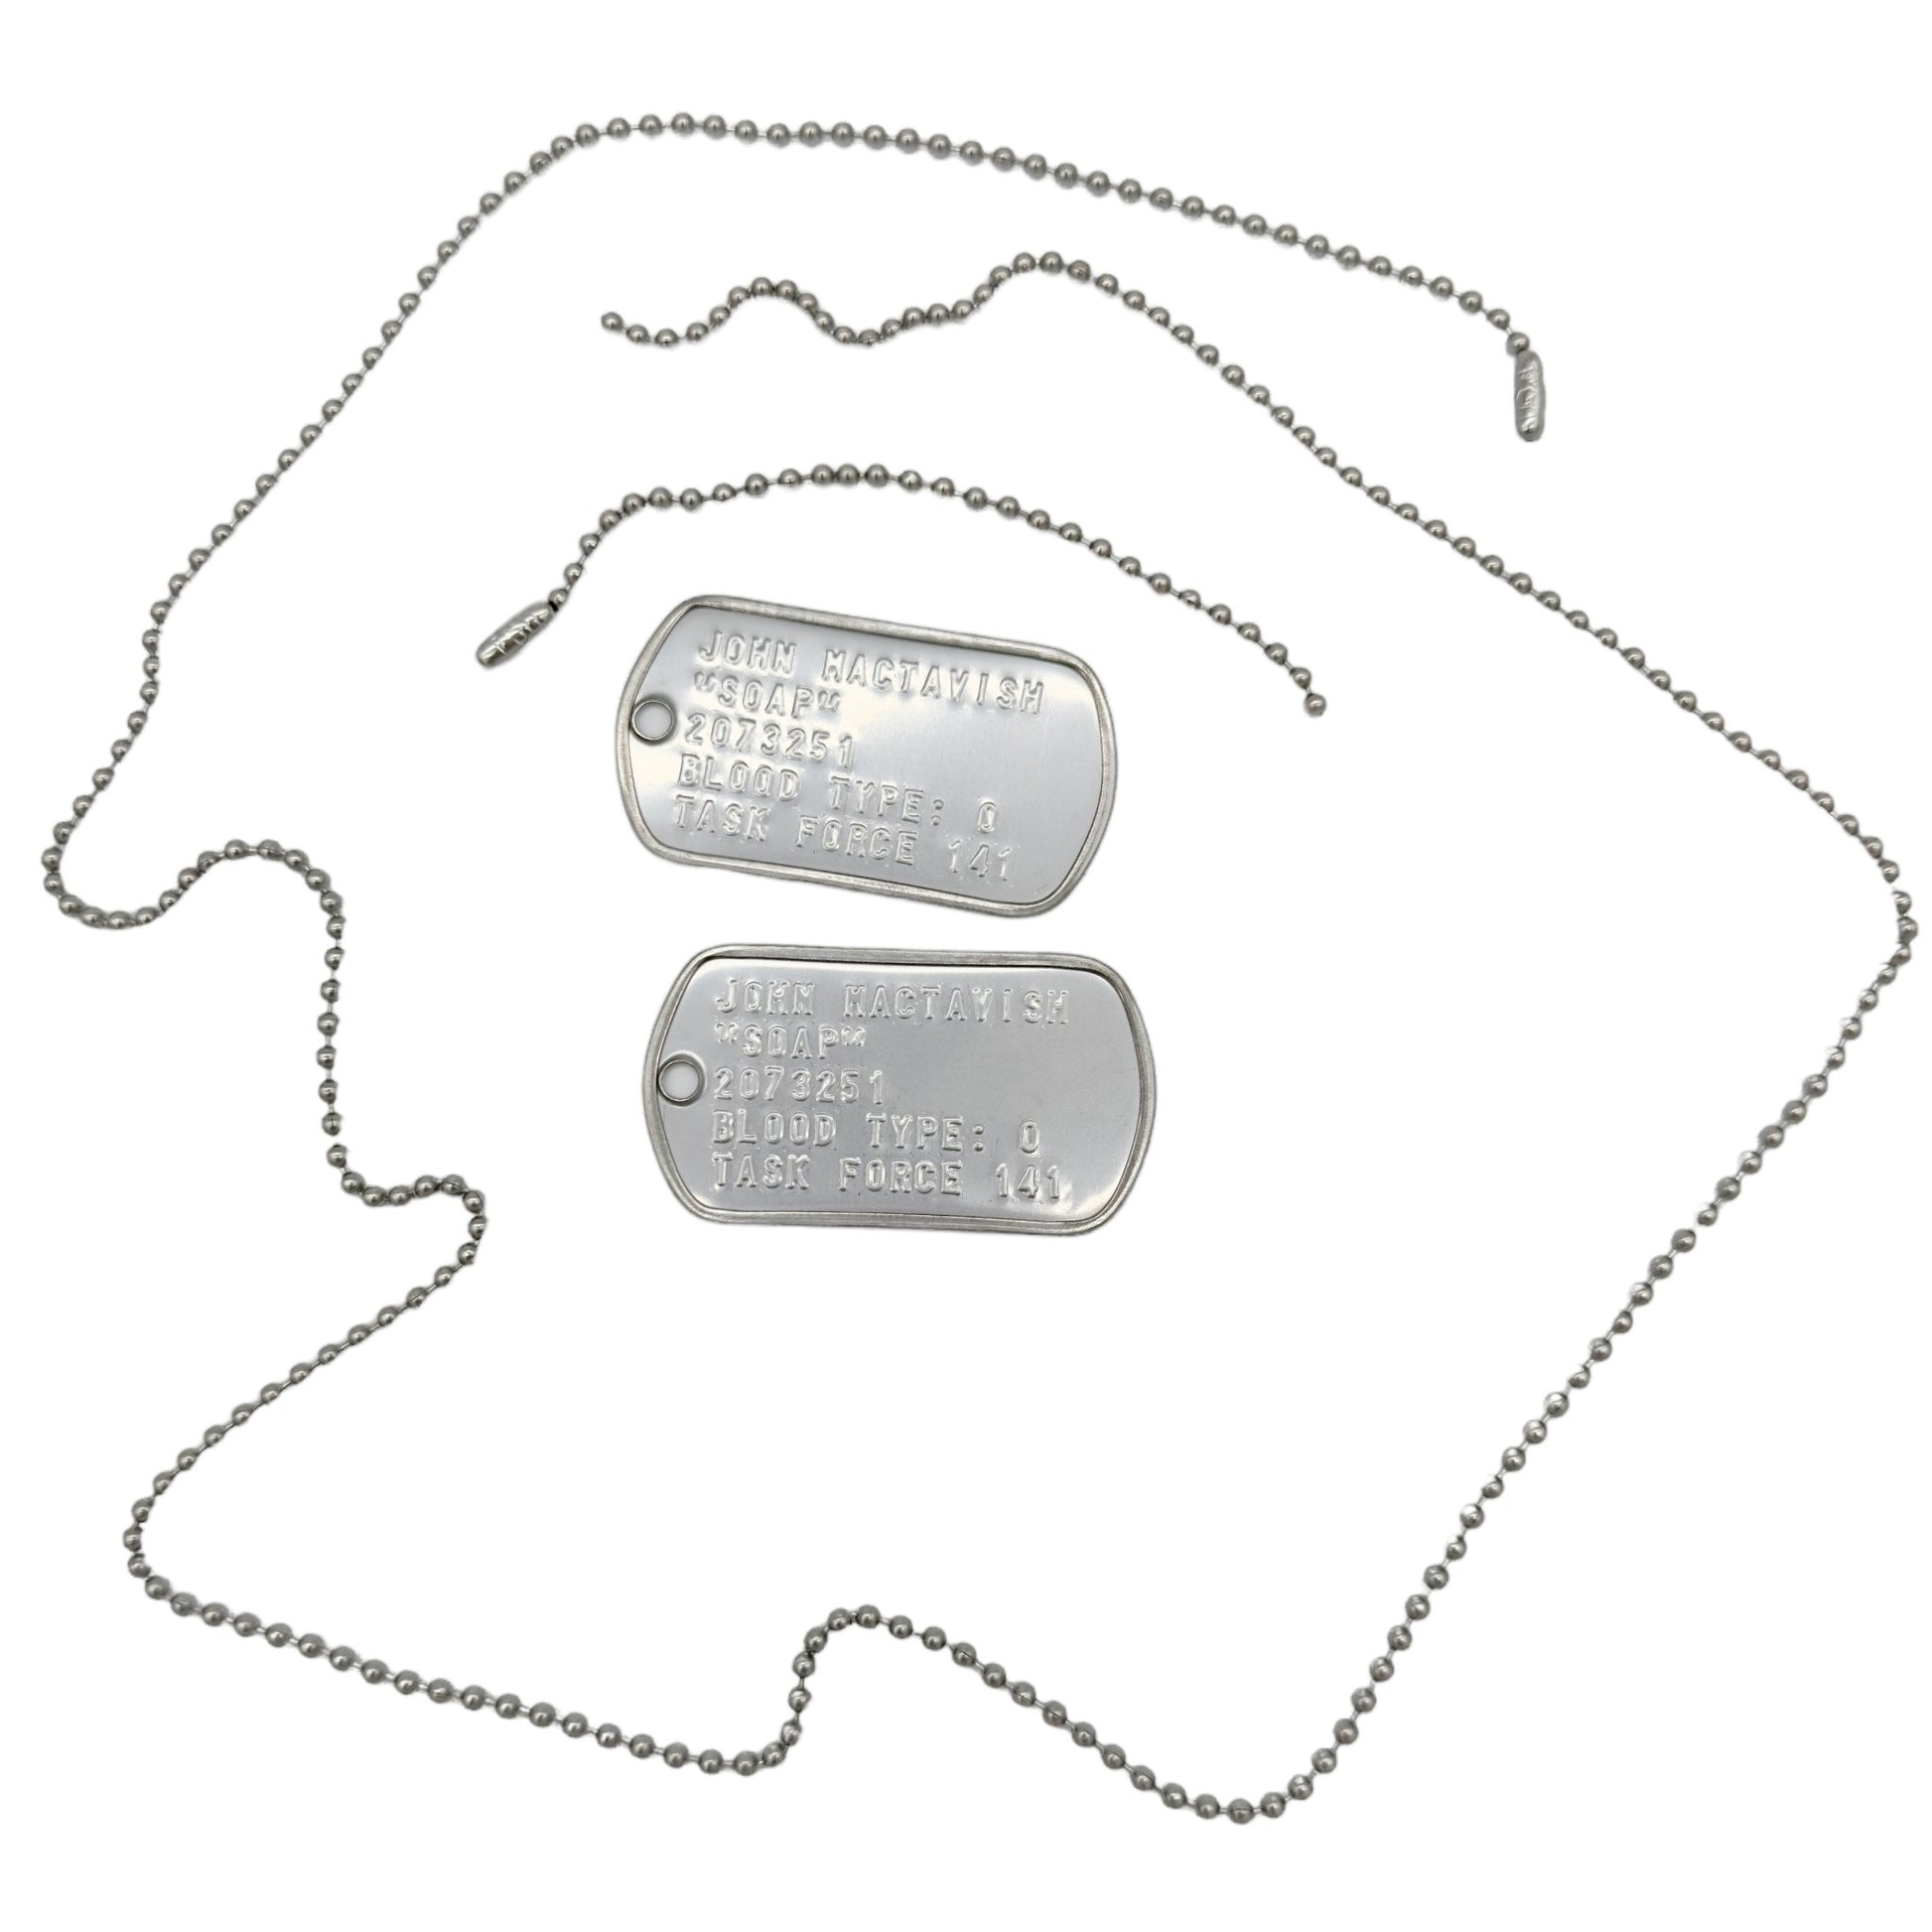 Captain John Price Military Dog Tag Set- Stainless Steel - Chains Included, TheDogTagCo